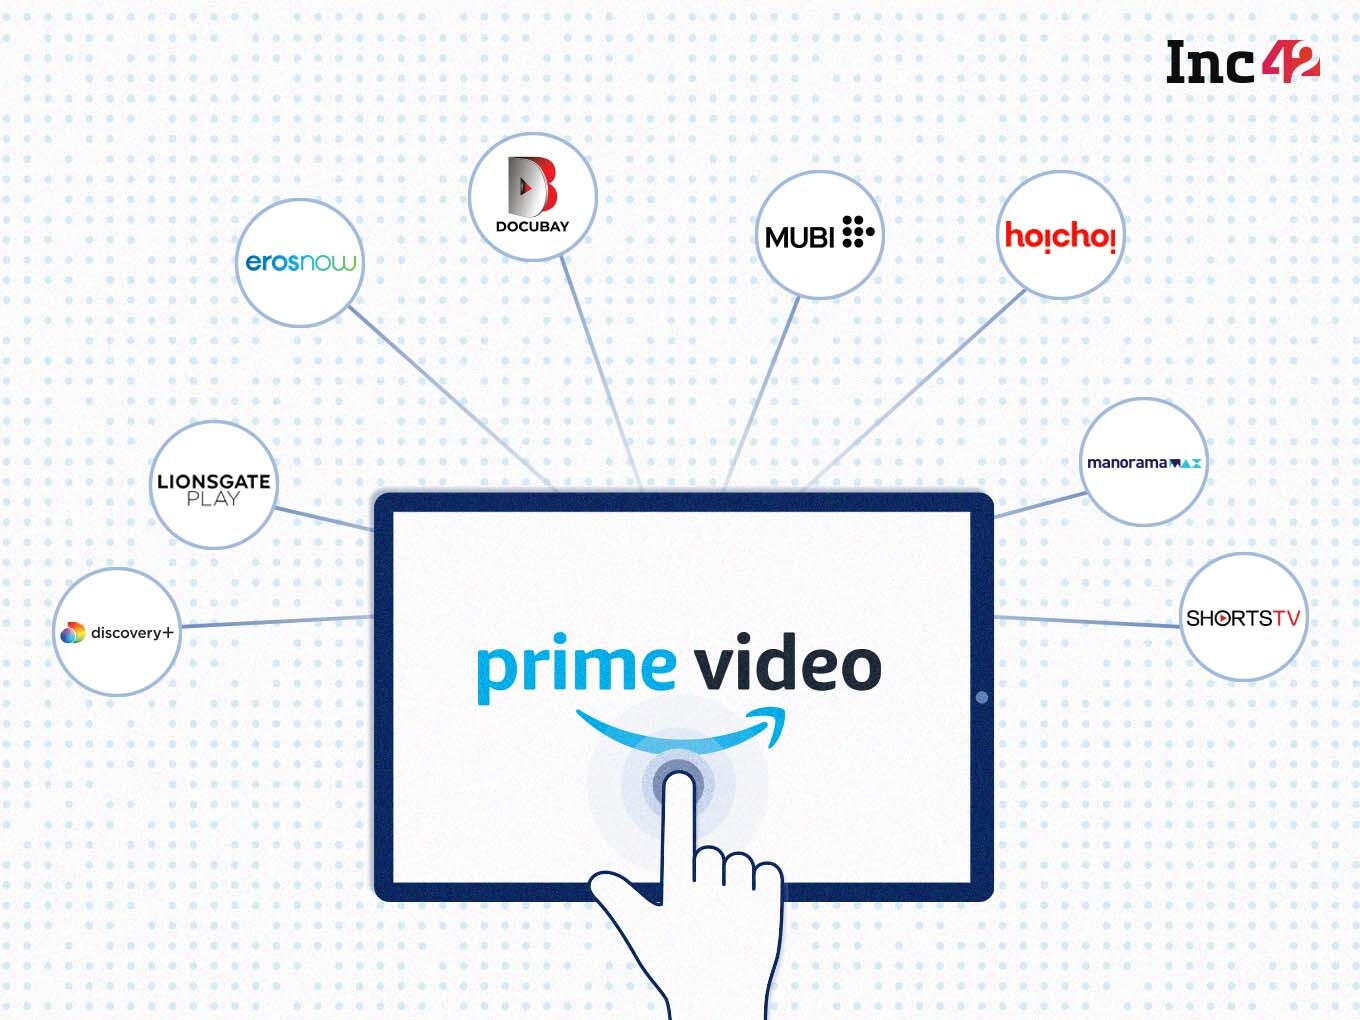 Amazon Strengthens OTT Play In India, Rolls Out Prime Video Channels With 8 Partners